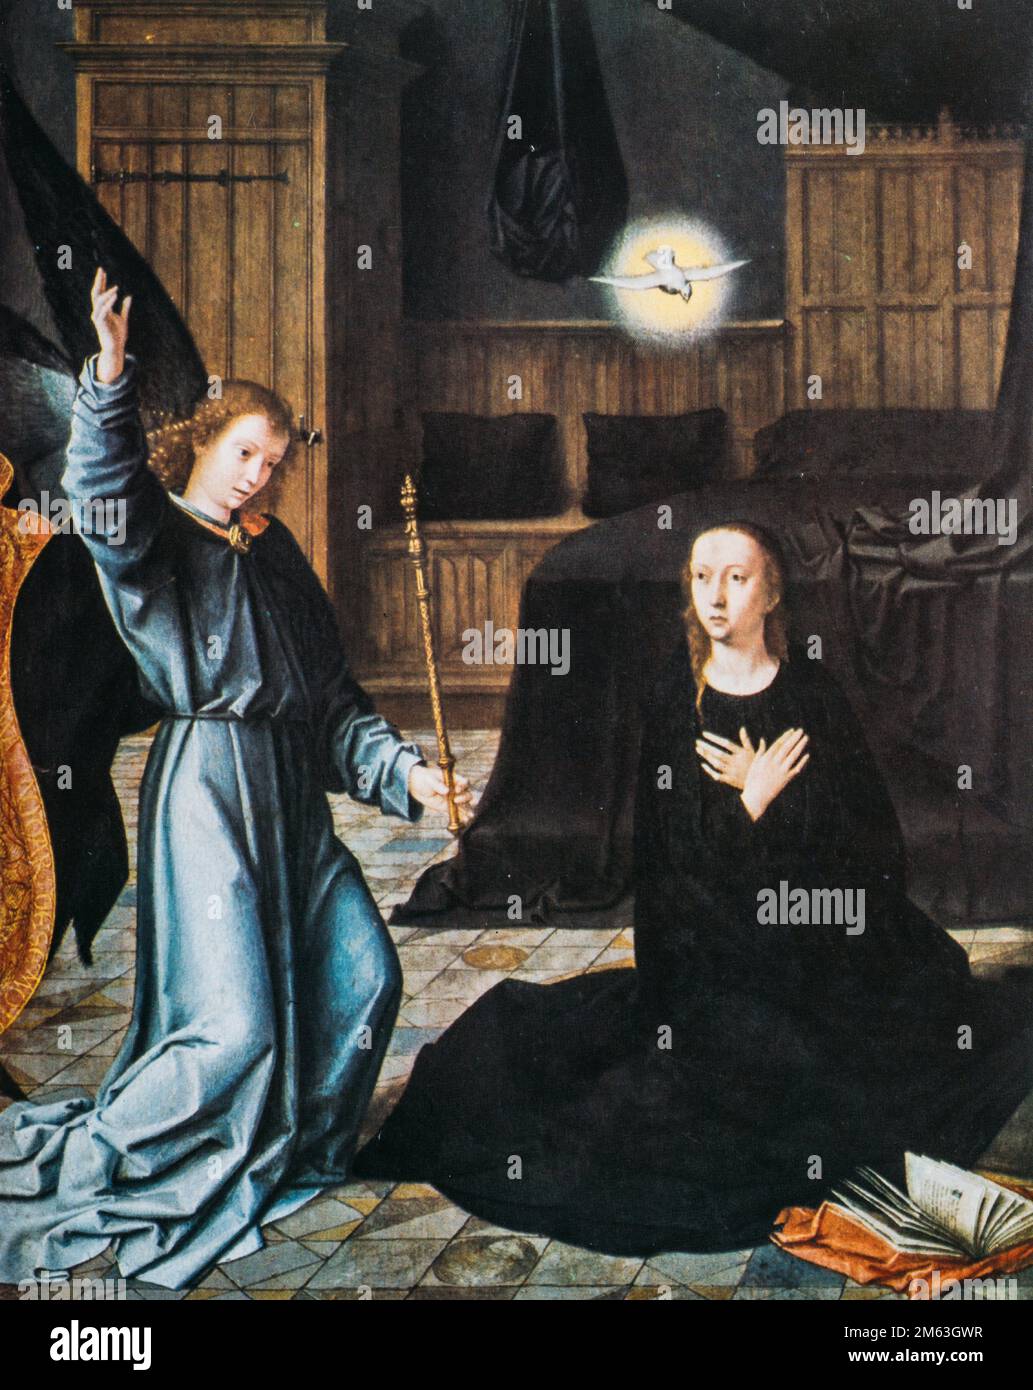 Gerard David. The Annunciation, 1523. Was An Early Netherlandish Painter And Manuscript Illuminator Known For His Brilliant Use Of Color. Stock Photo